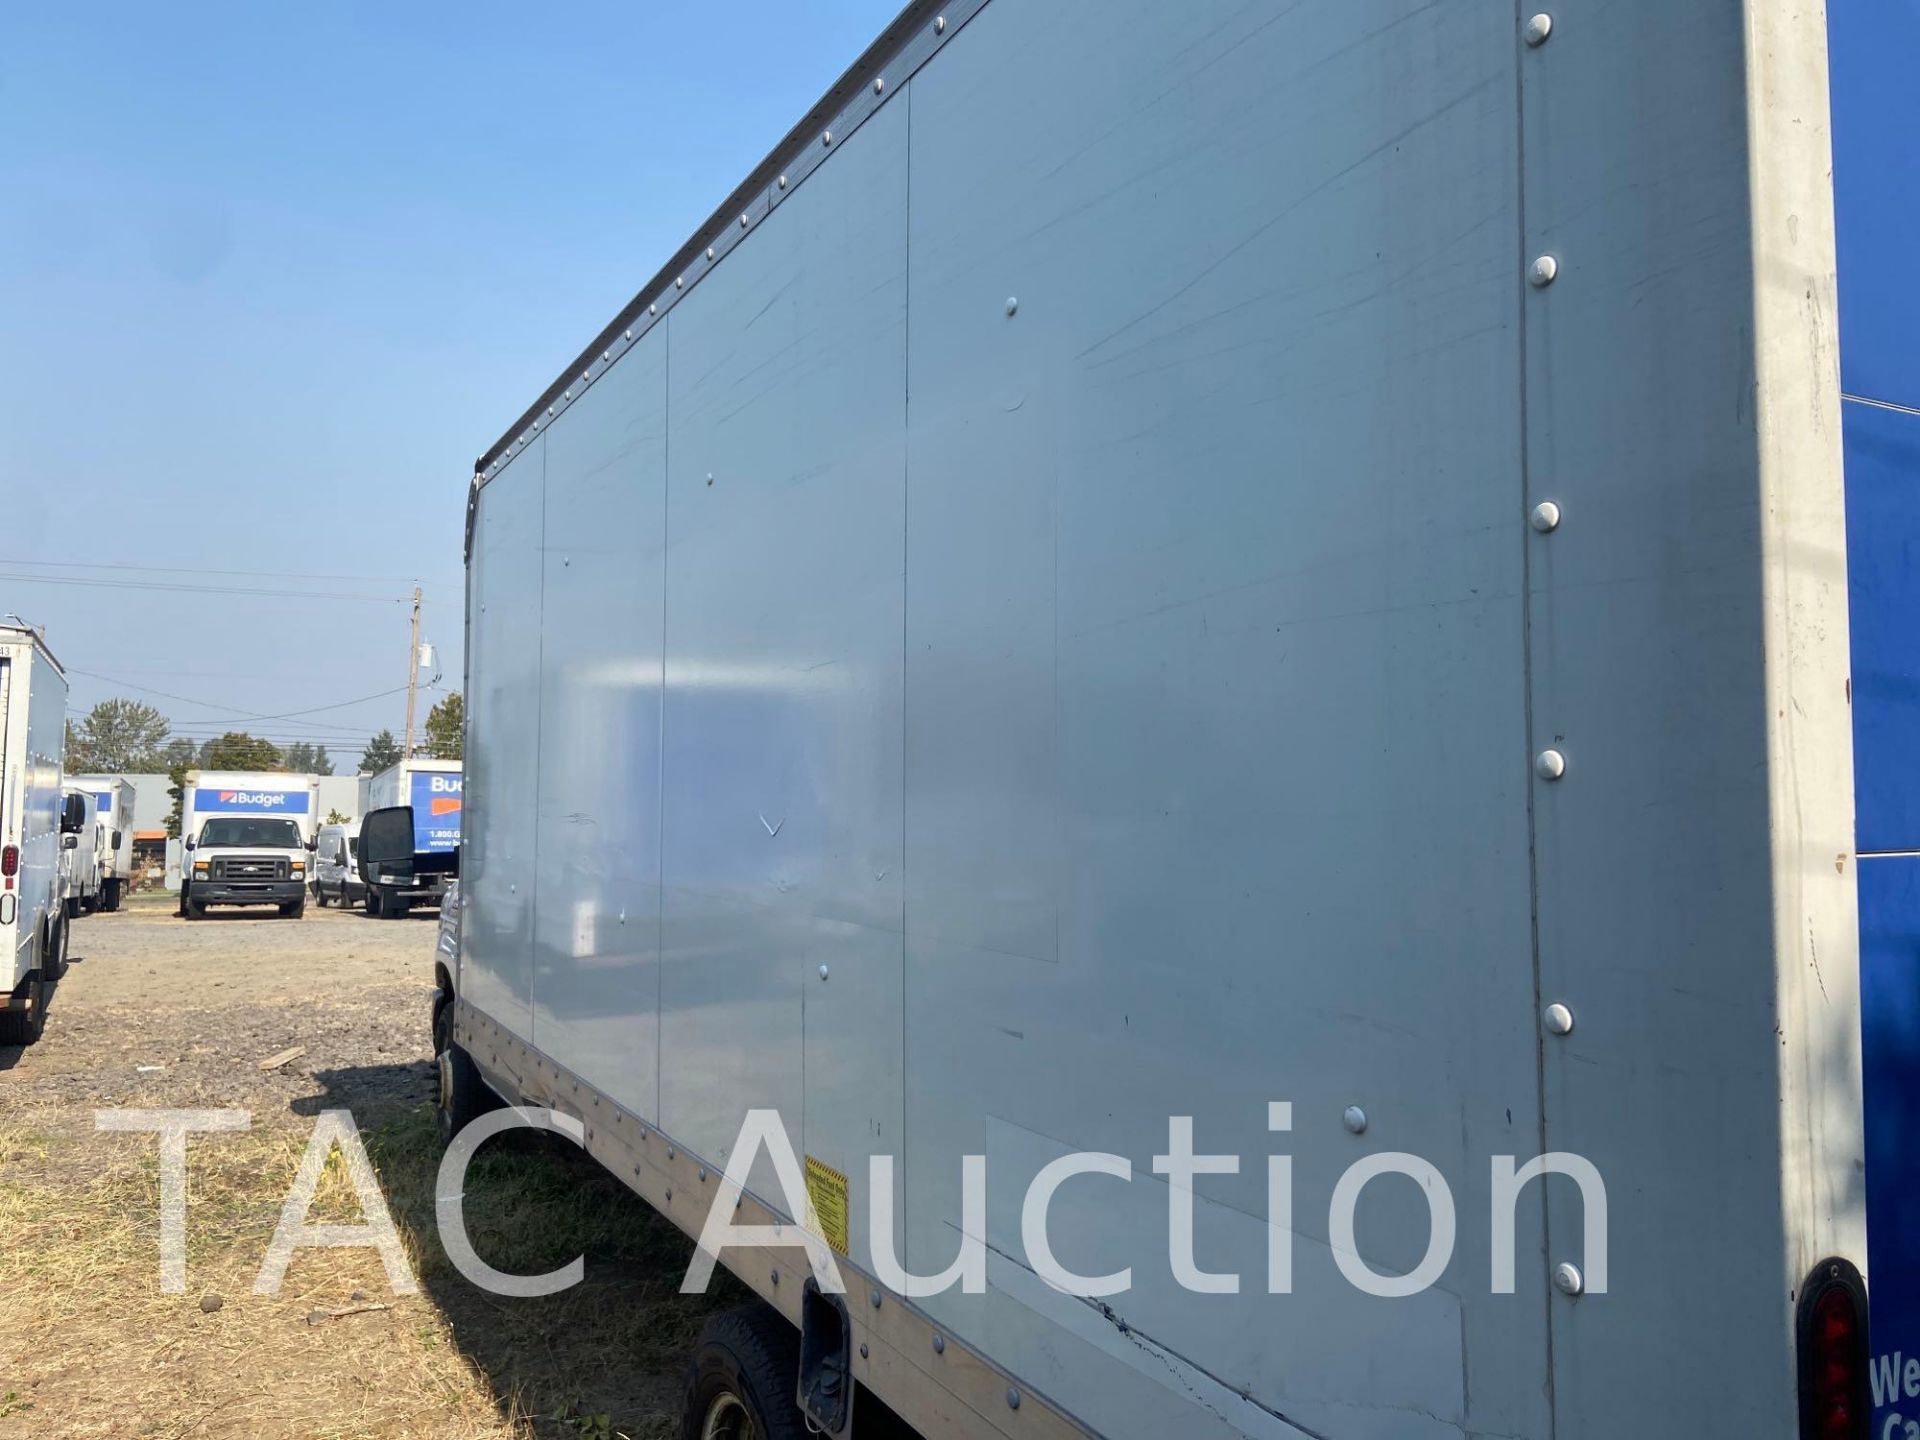 2015 Ford E-350 16ft Box Truck - Image 20 of 106